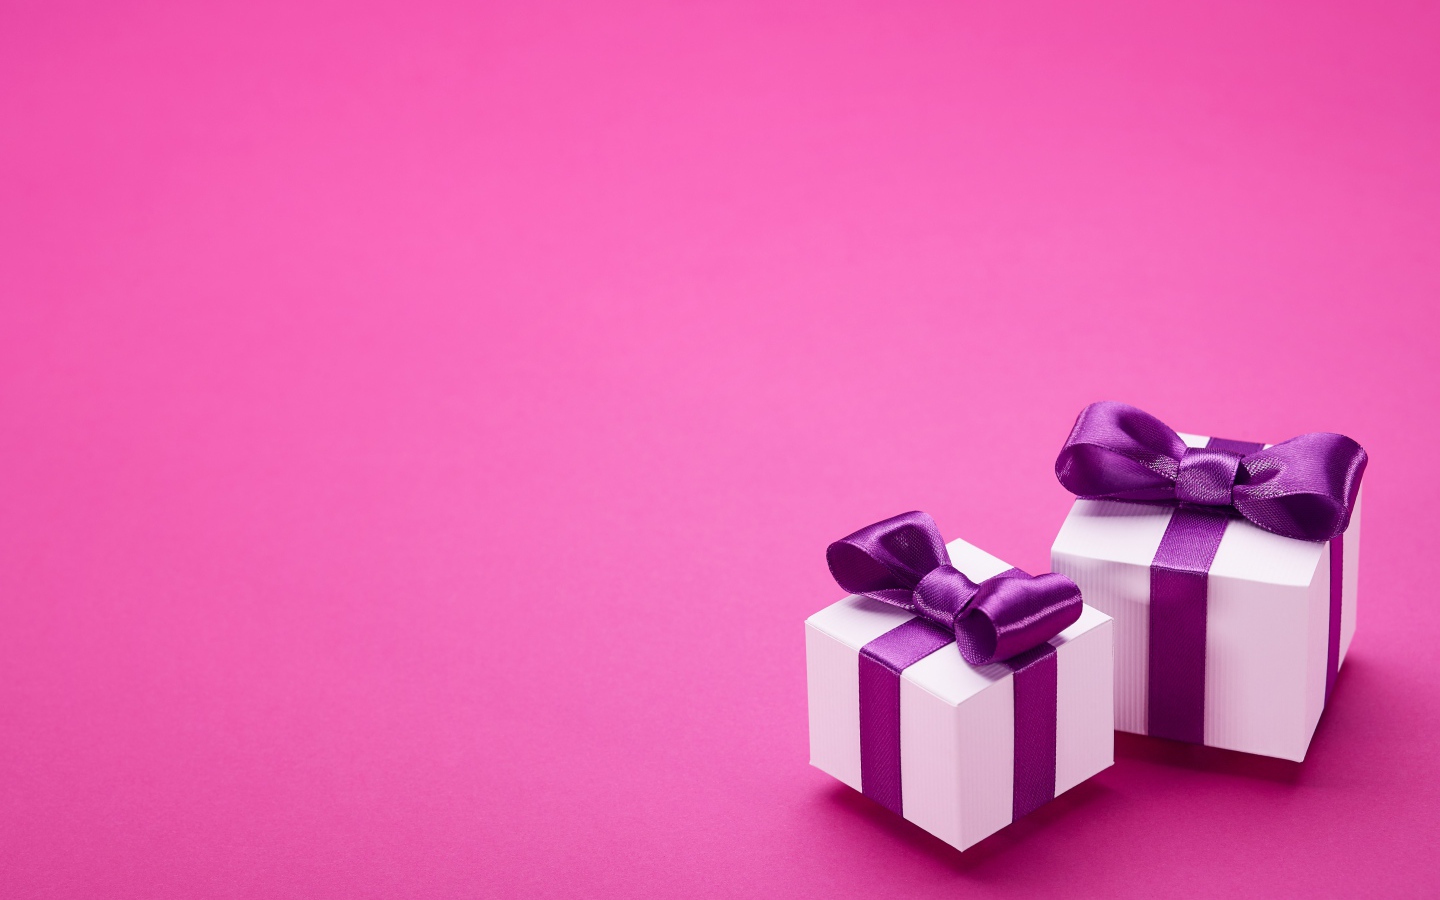 Two gifts with bows on a pink background